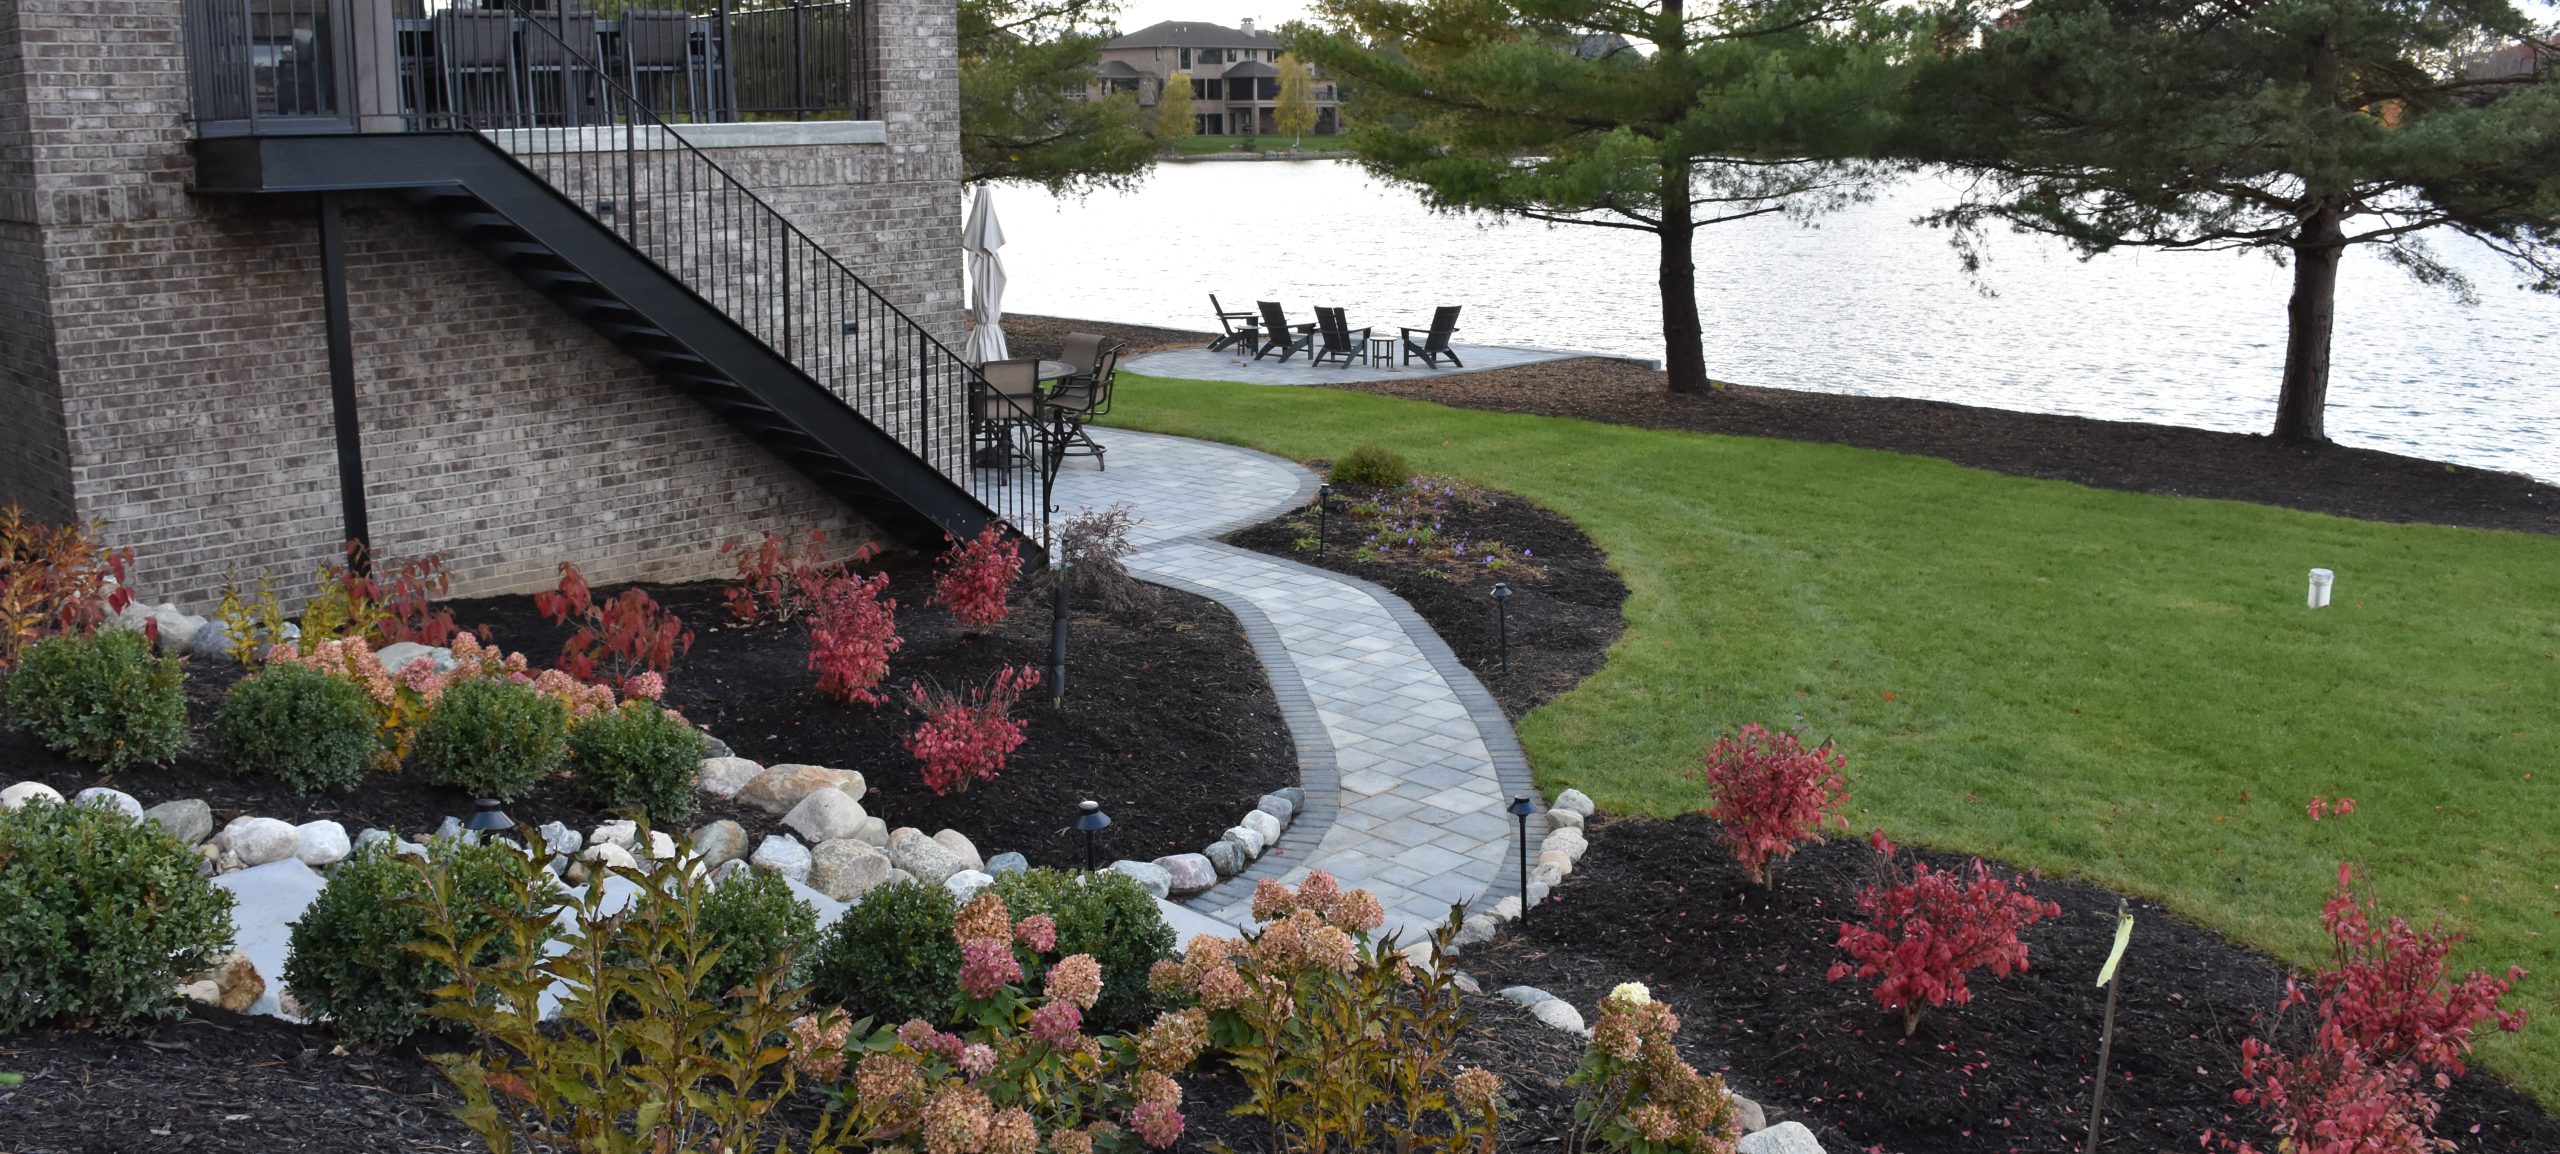 Landscape area with flower bed and walkway leading to stone building